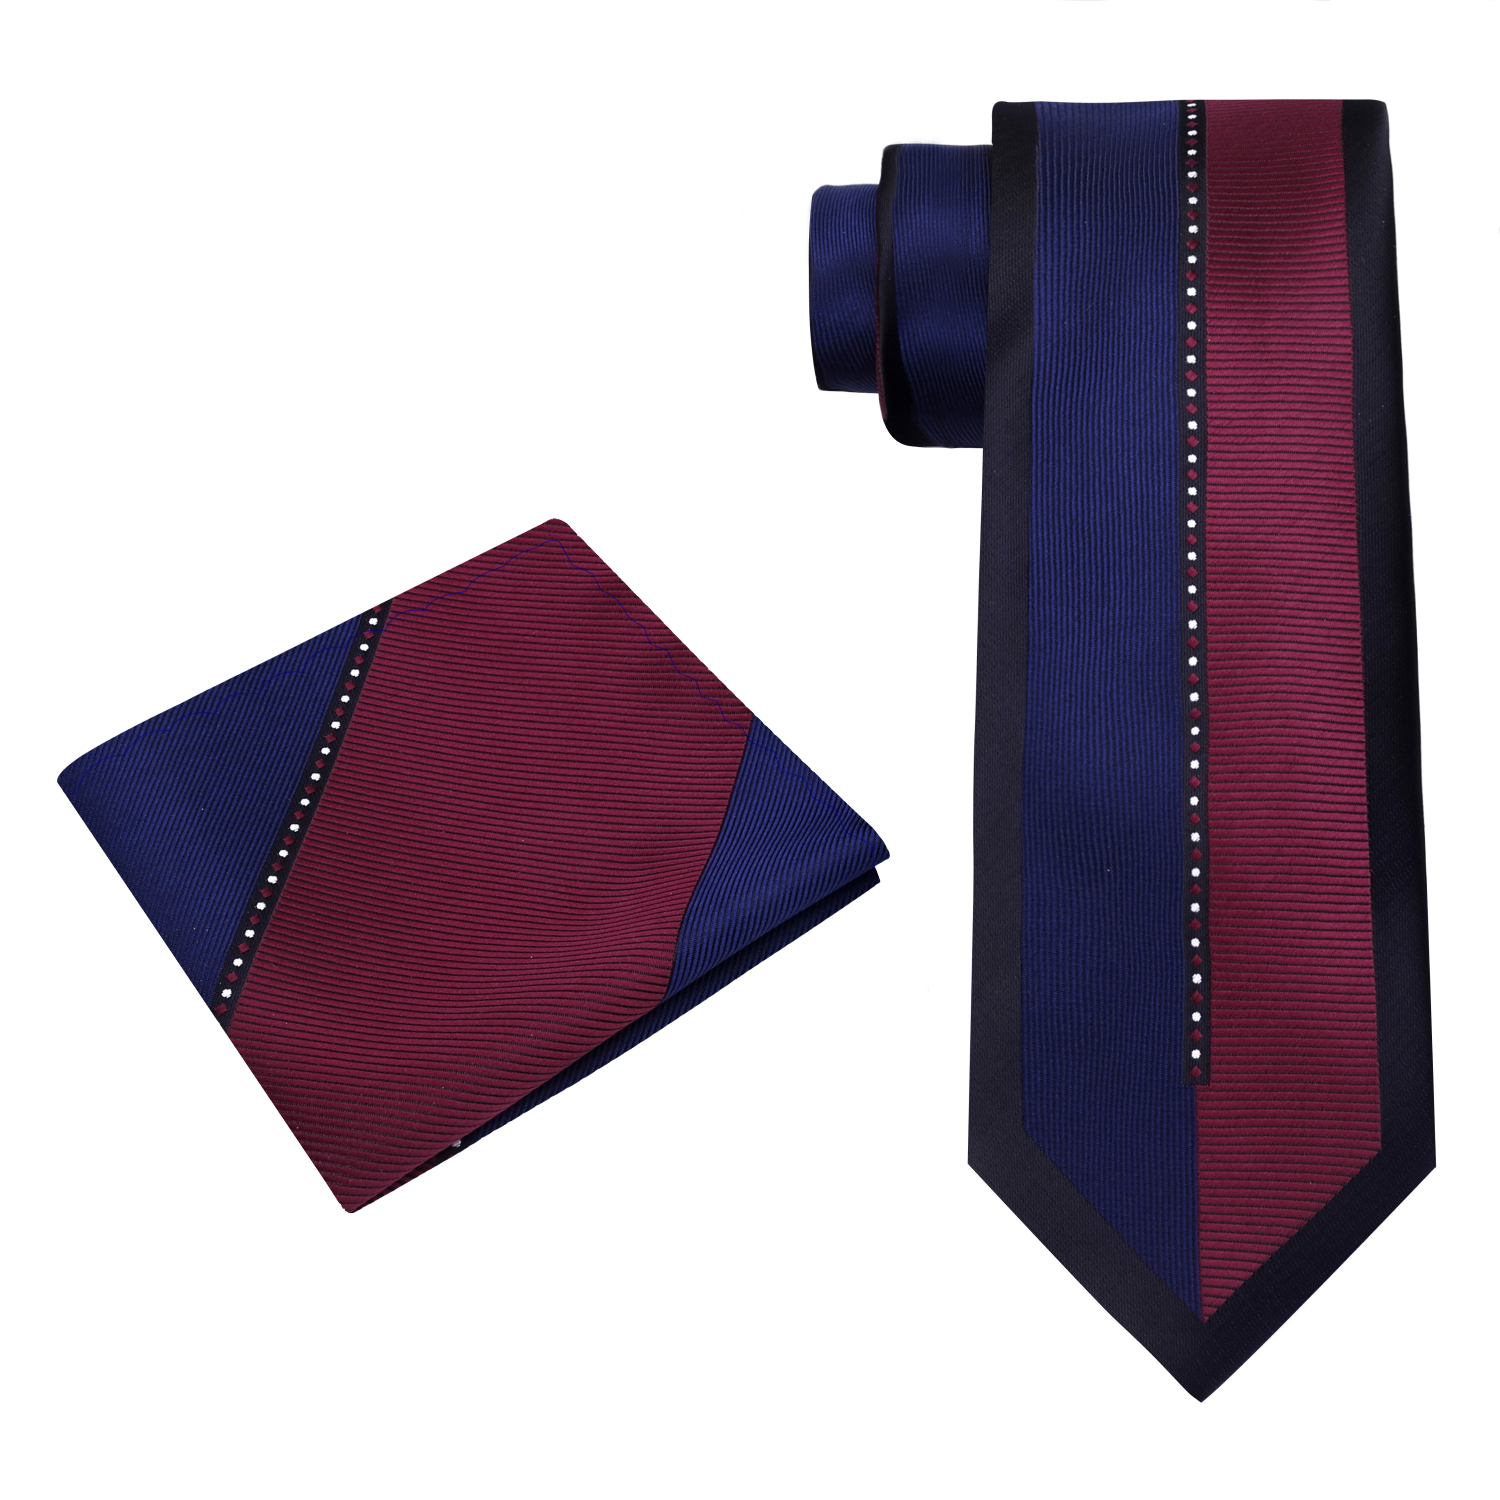 View 2: Blue and Burgundy Lucky Necktie and Square